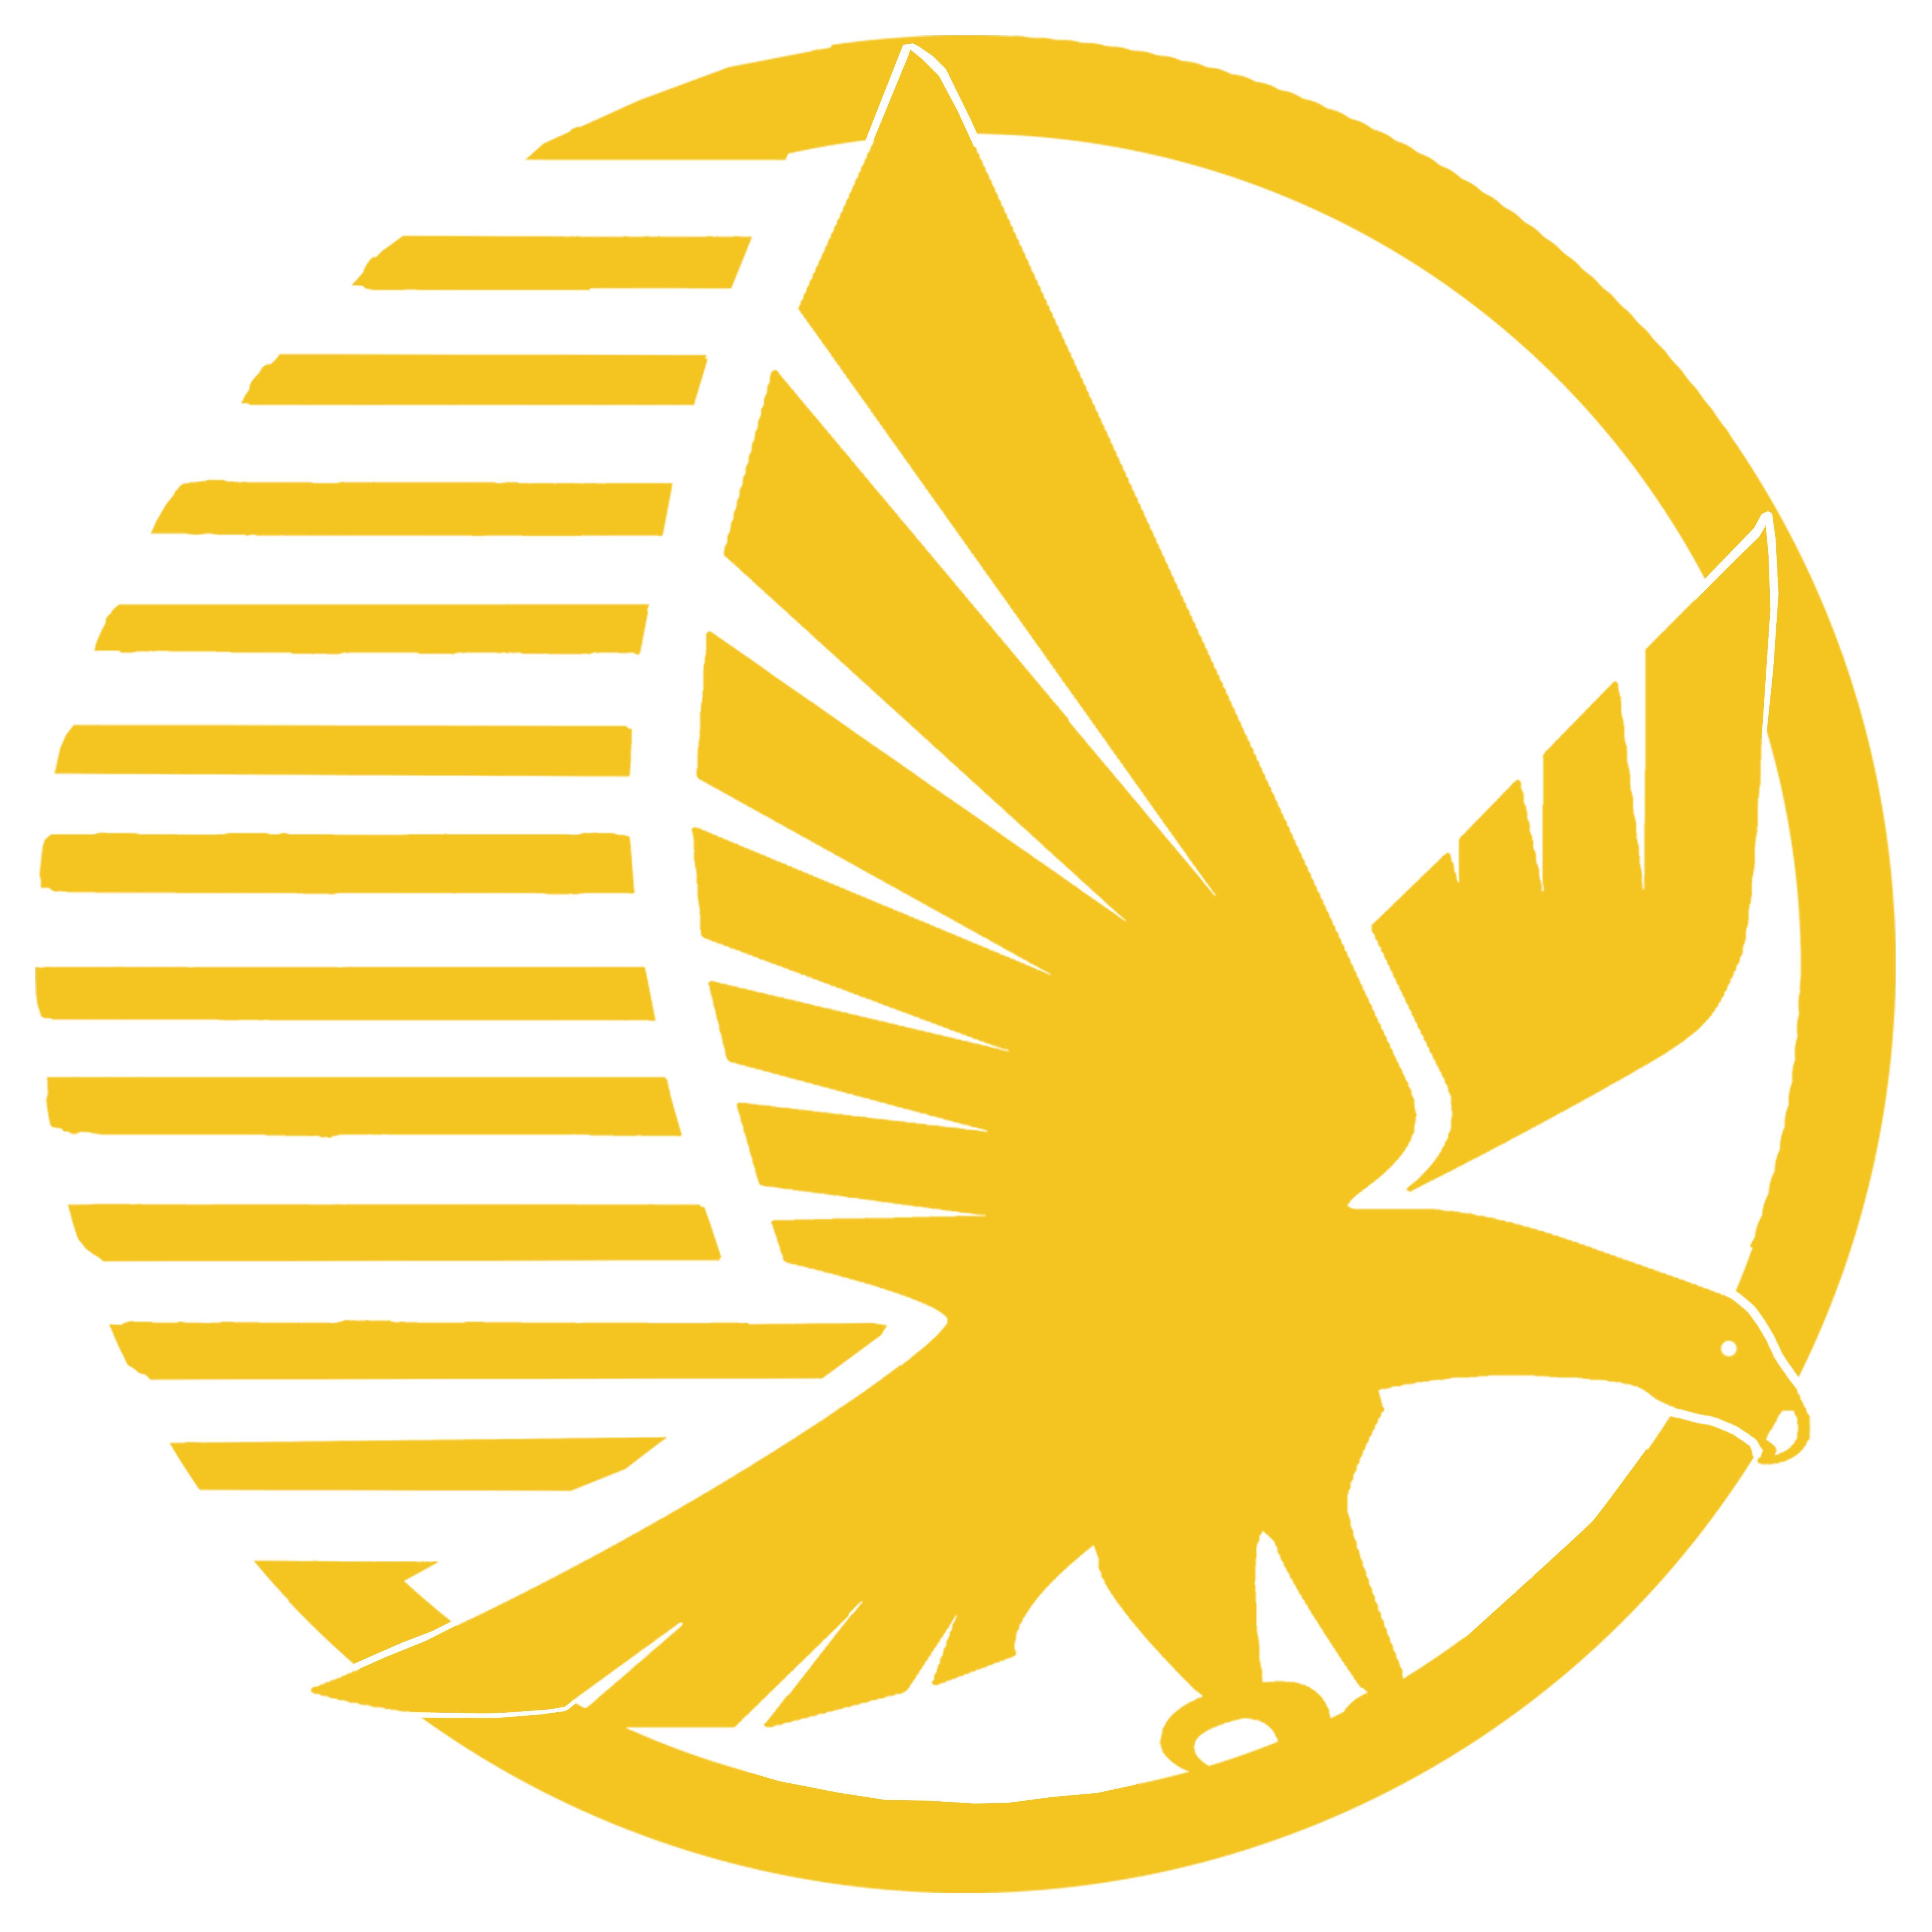 Blue and Yellow Falcon Logo - Partners » Dubai Gold & Commodities Exchange